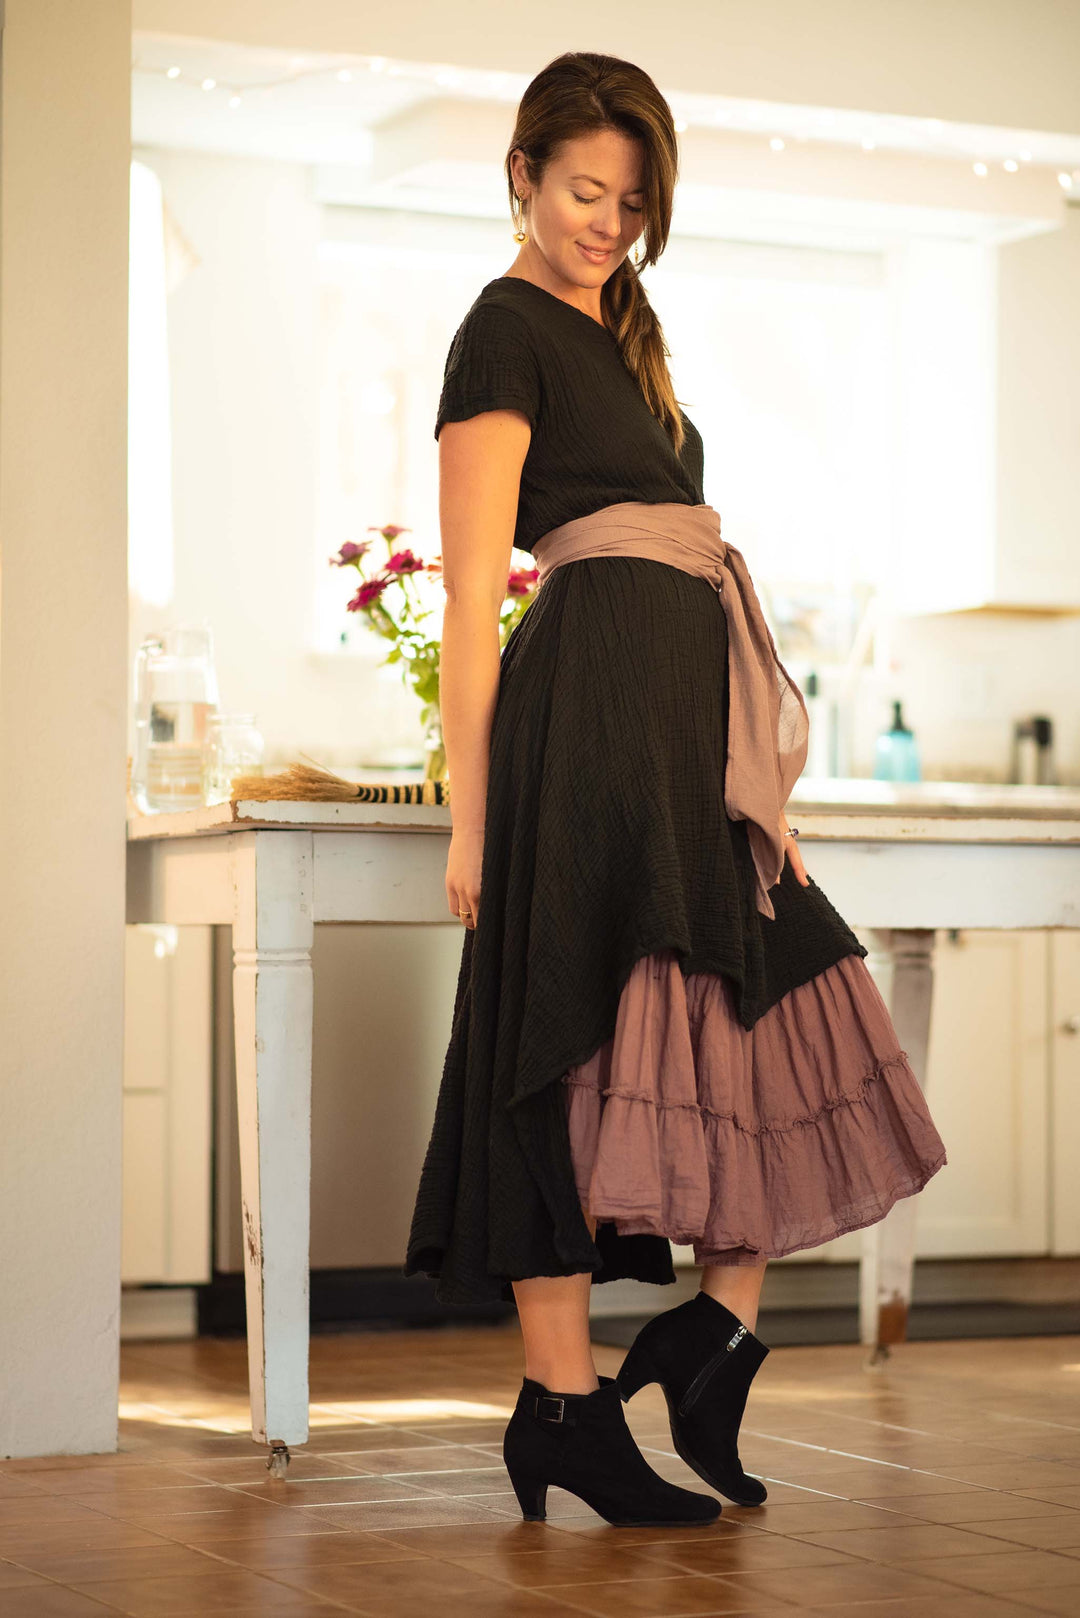 Woman models a long black dress layered over a purple ruffle skirt. She has on a purple belt and black booties.